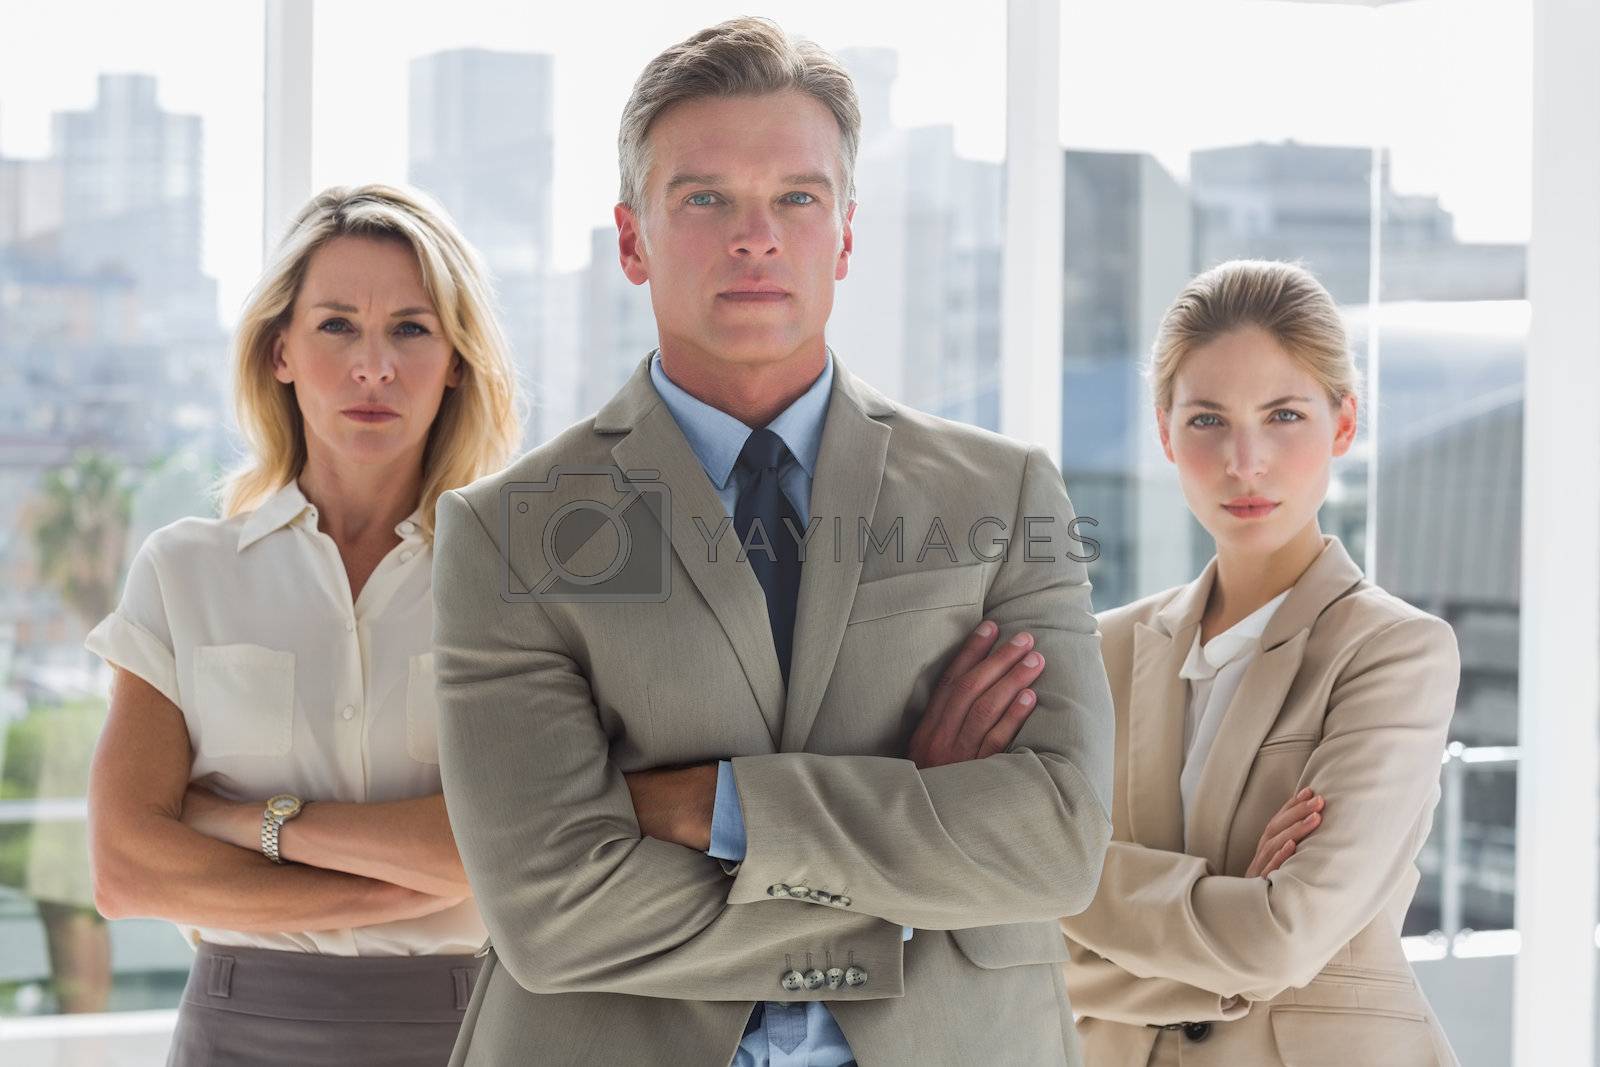 Royalty free image of Three business people standing together by Wavebreakmedia